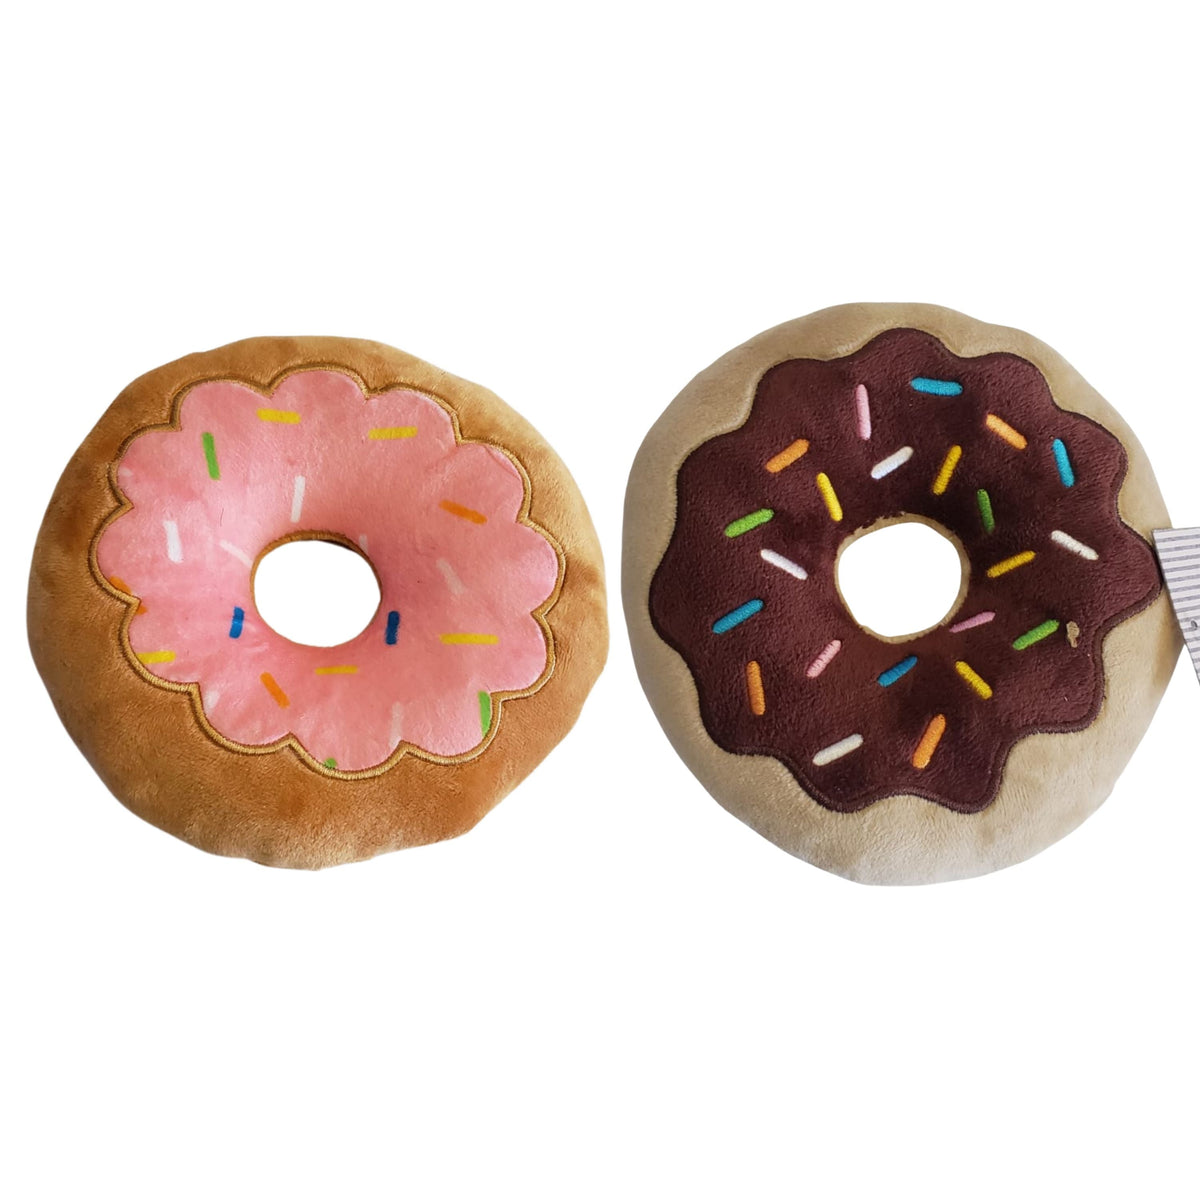 Interactive Donut Plush Dog Toy Set (Chocolate & Strawberry) by American Pet Supplies